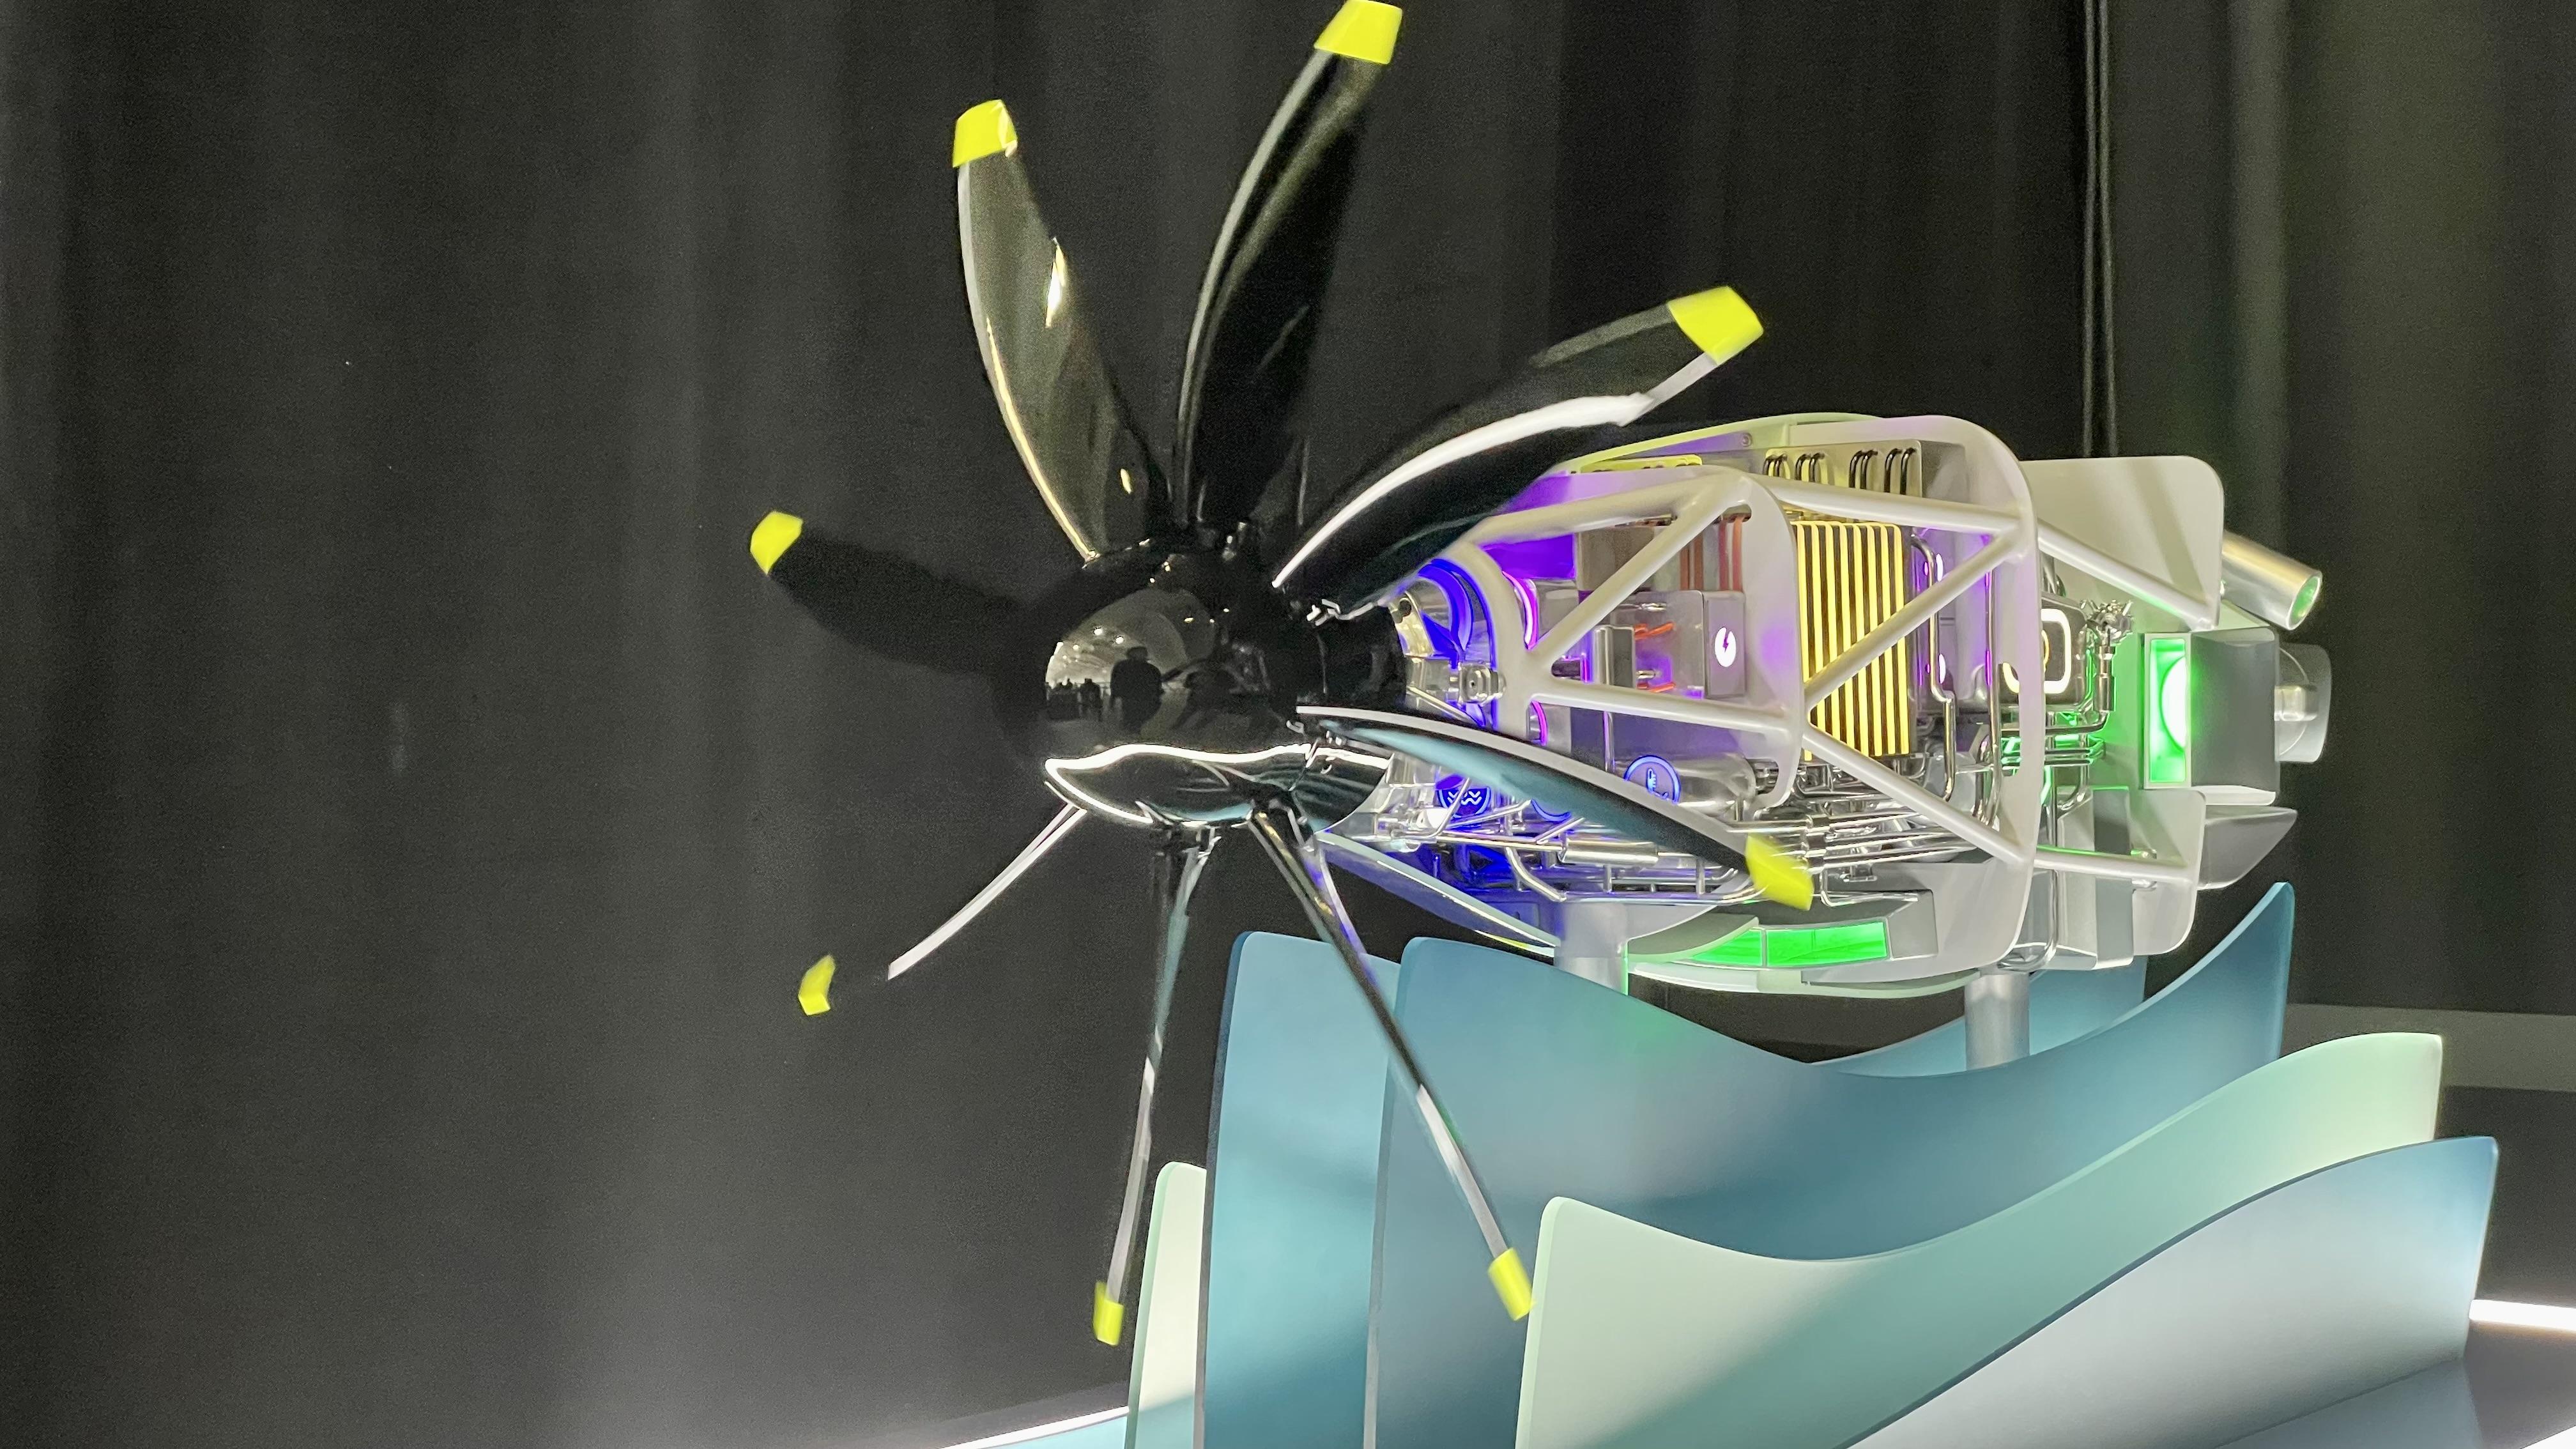 Fuel Cell engine model at Airbus Summit 2022